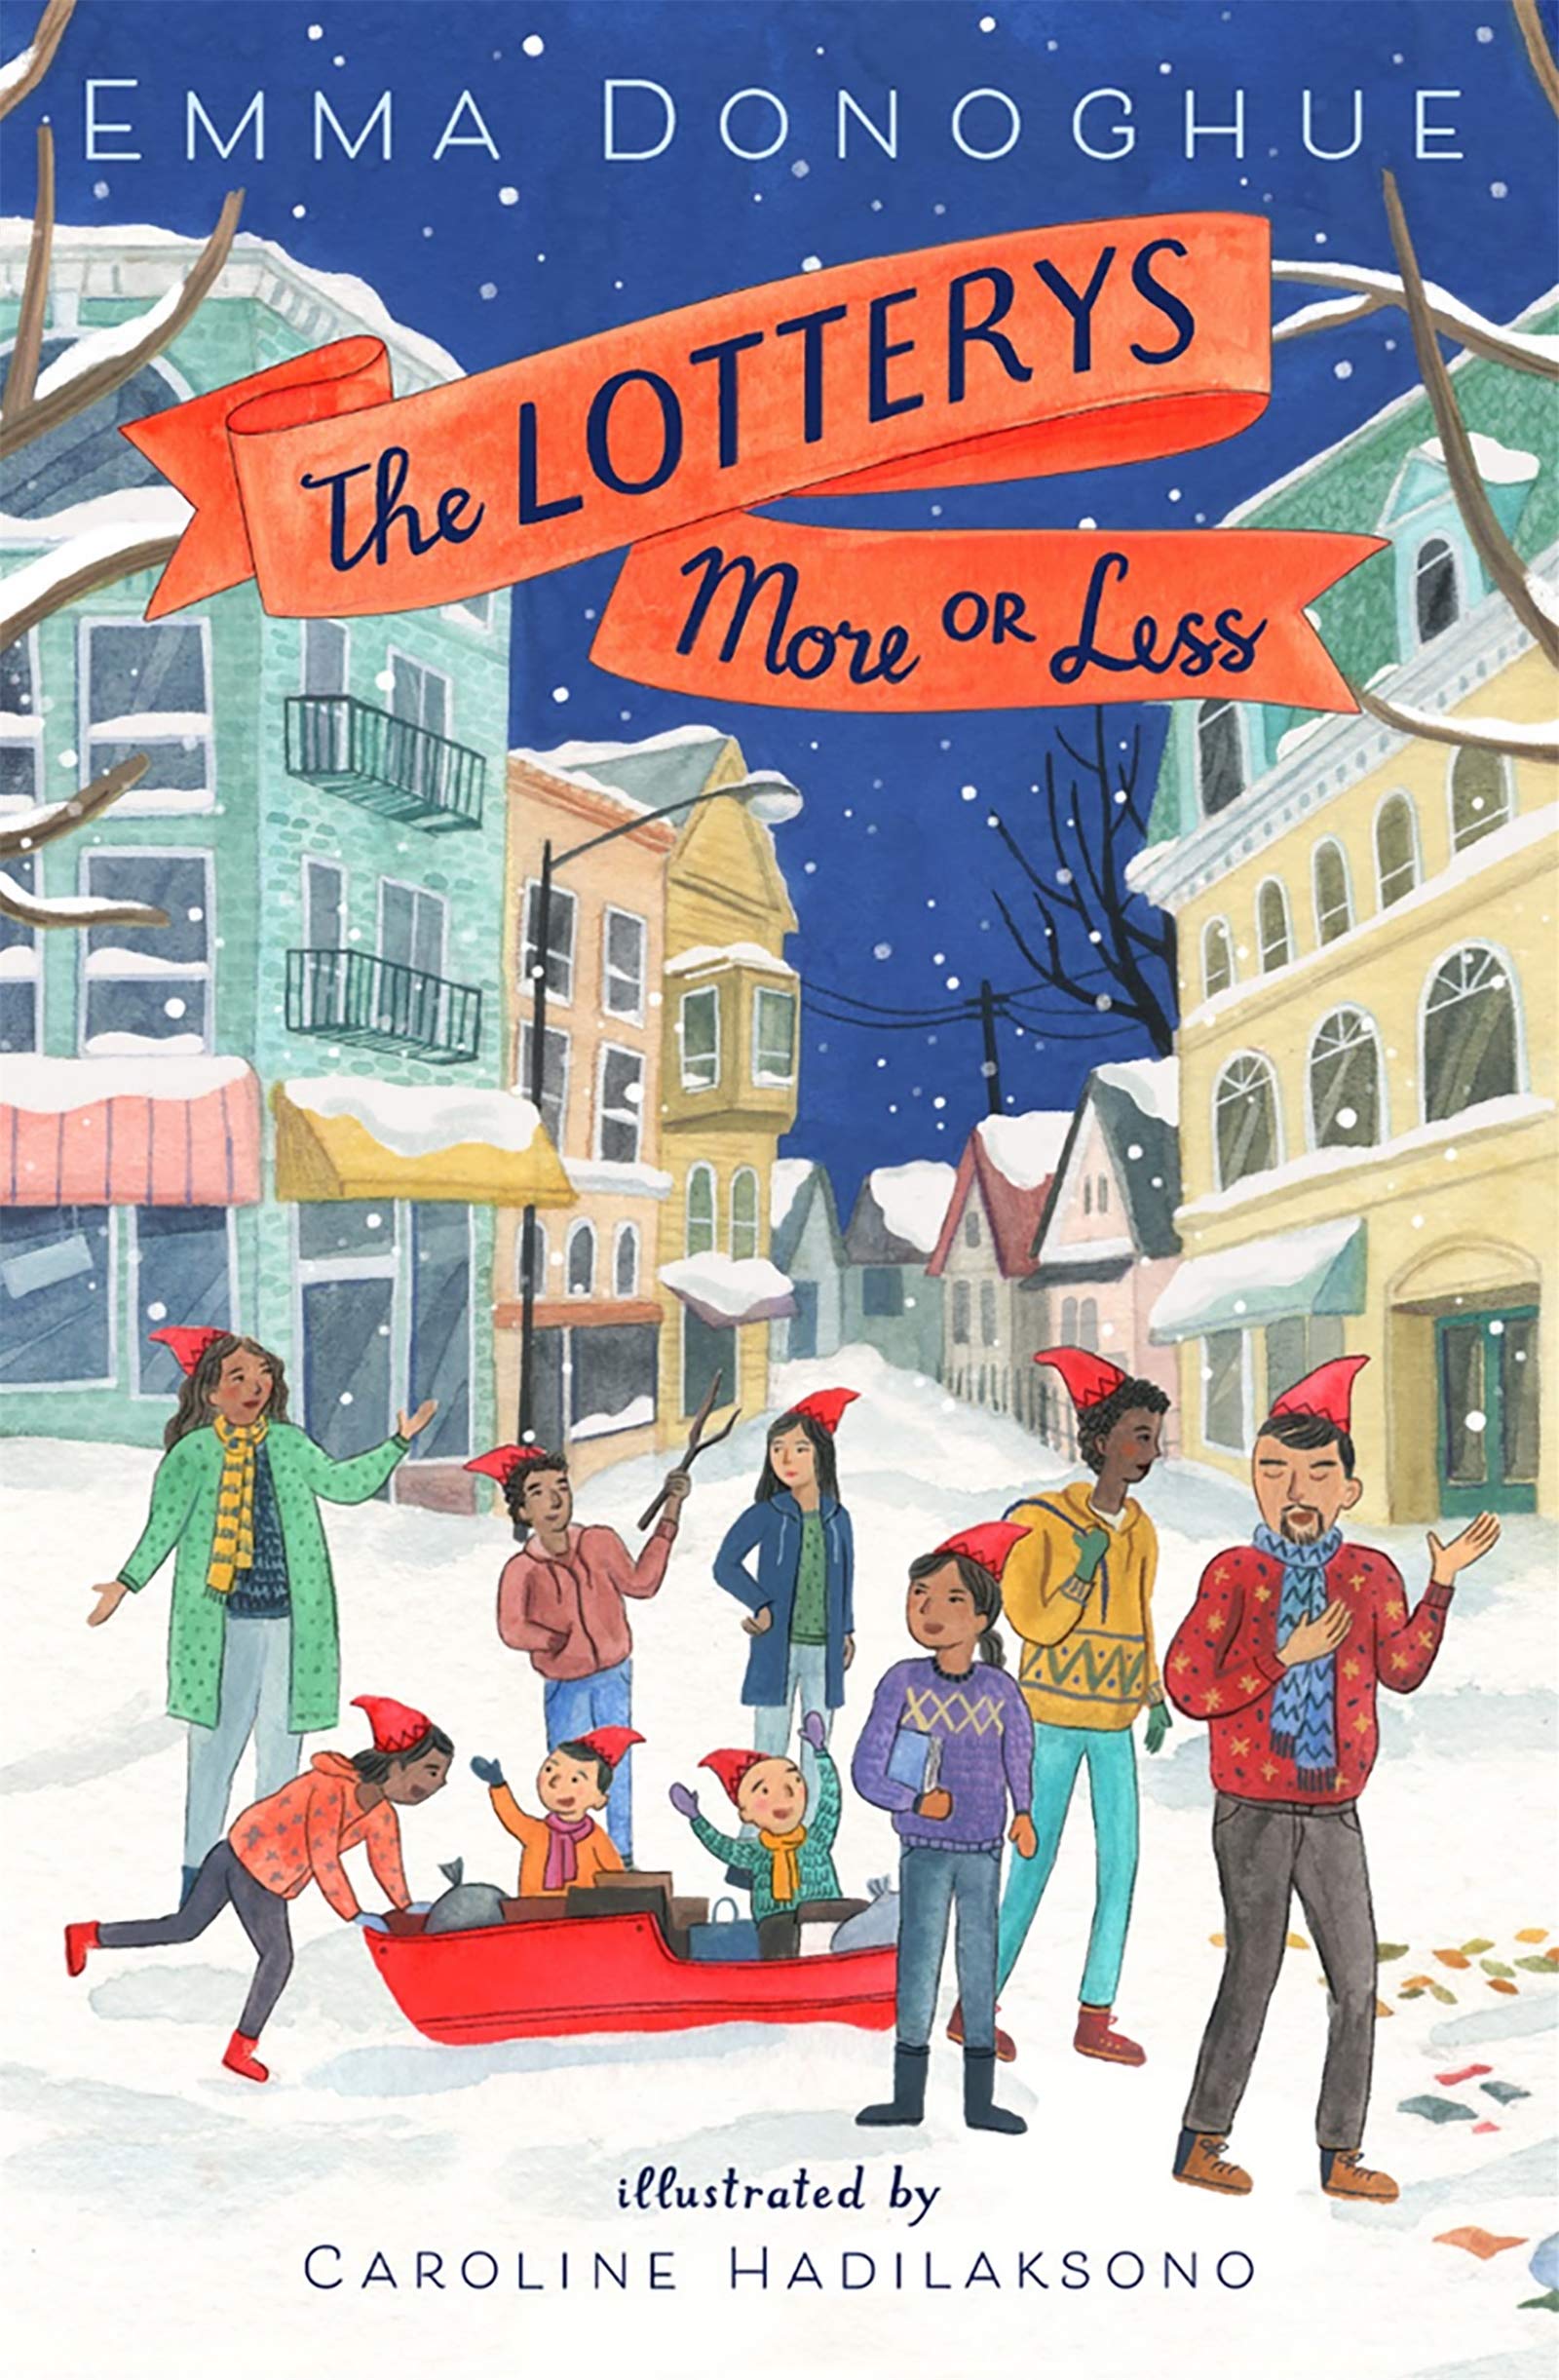 The Lotterys More or Less | Emma Donoghue